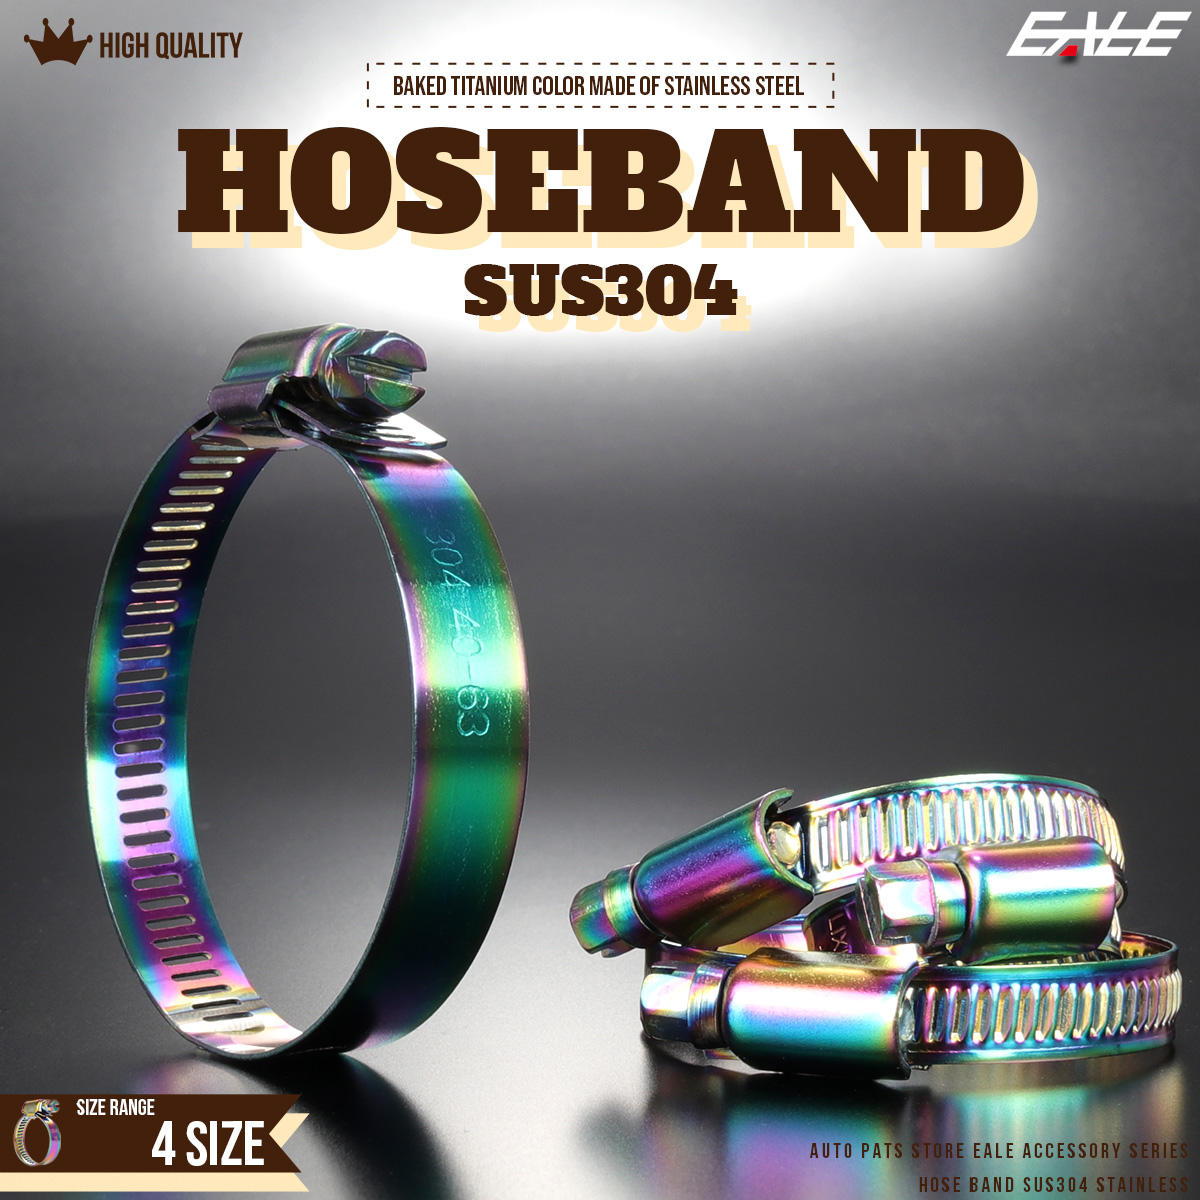  hose band roasting titanium color conform diameter 16mm from 63mm till made of stainless steel all-purpose S-740-743